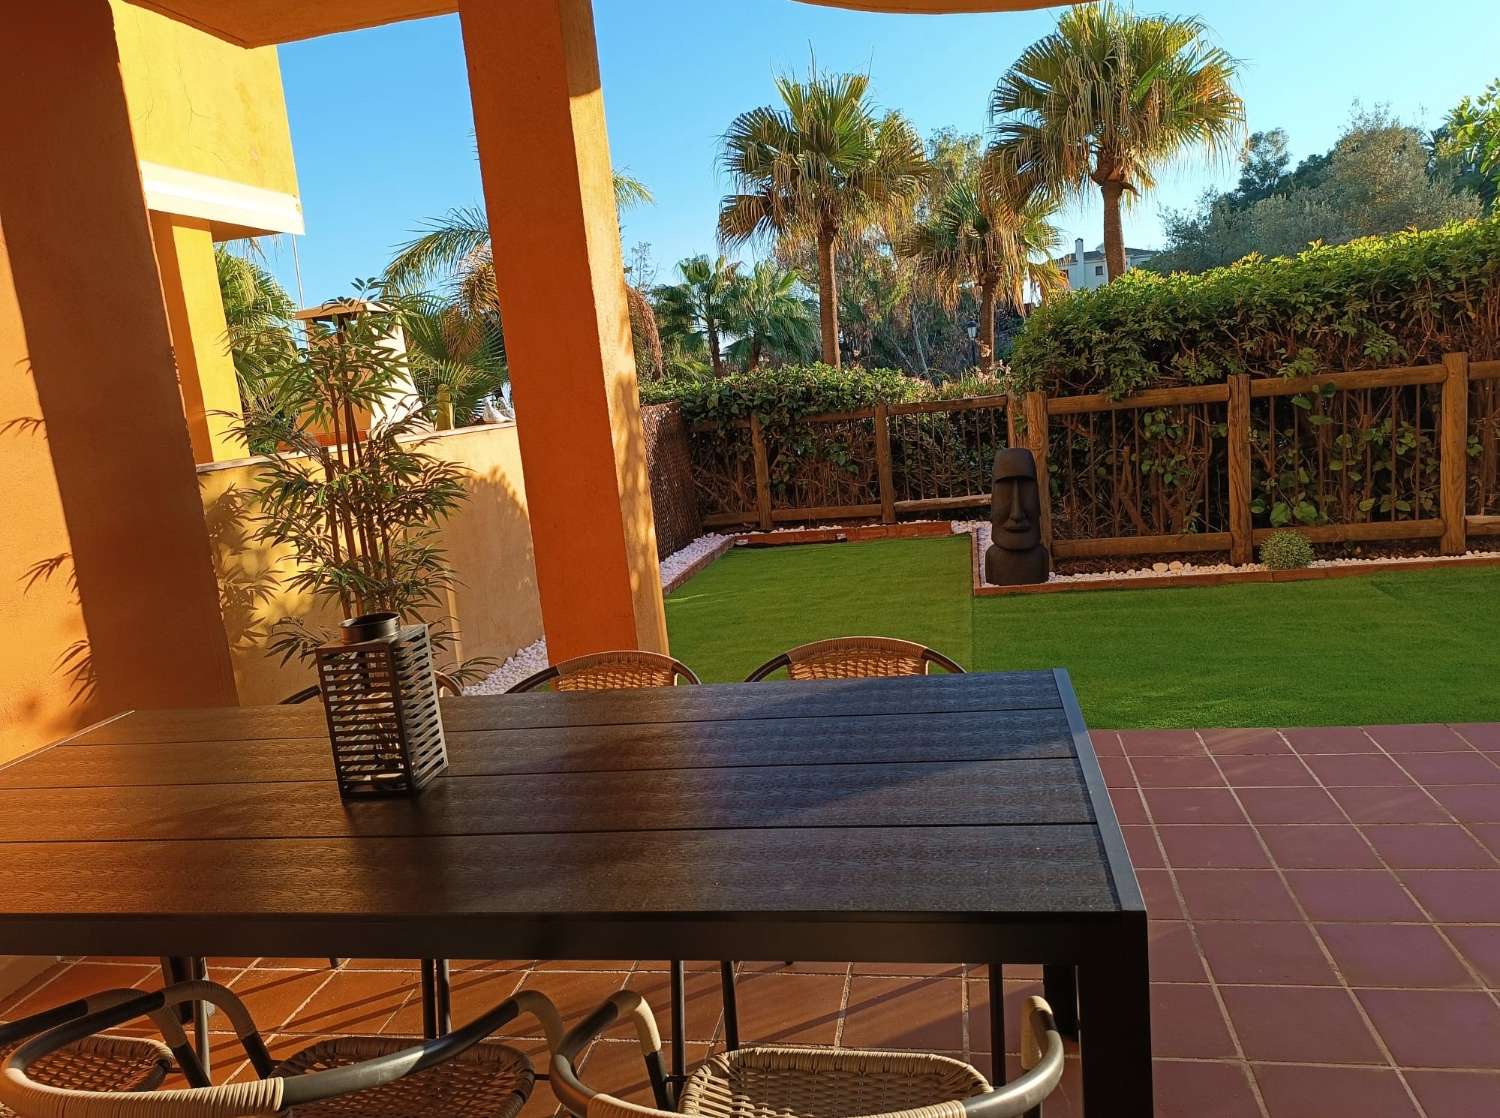 MID-SEASON. MAGNIFICENT APARTMENT FOR RENT IN THE AREA OF CABOPINO WITH SEA VIEWS (MARBELLA)